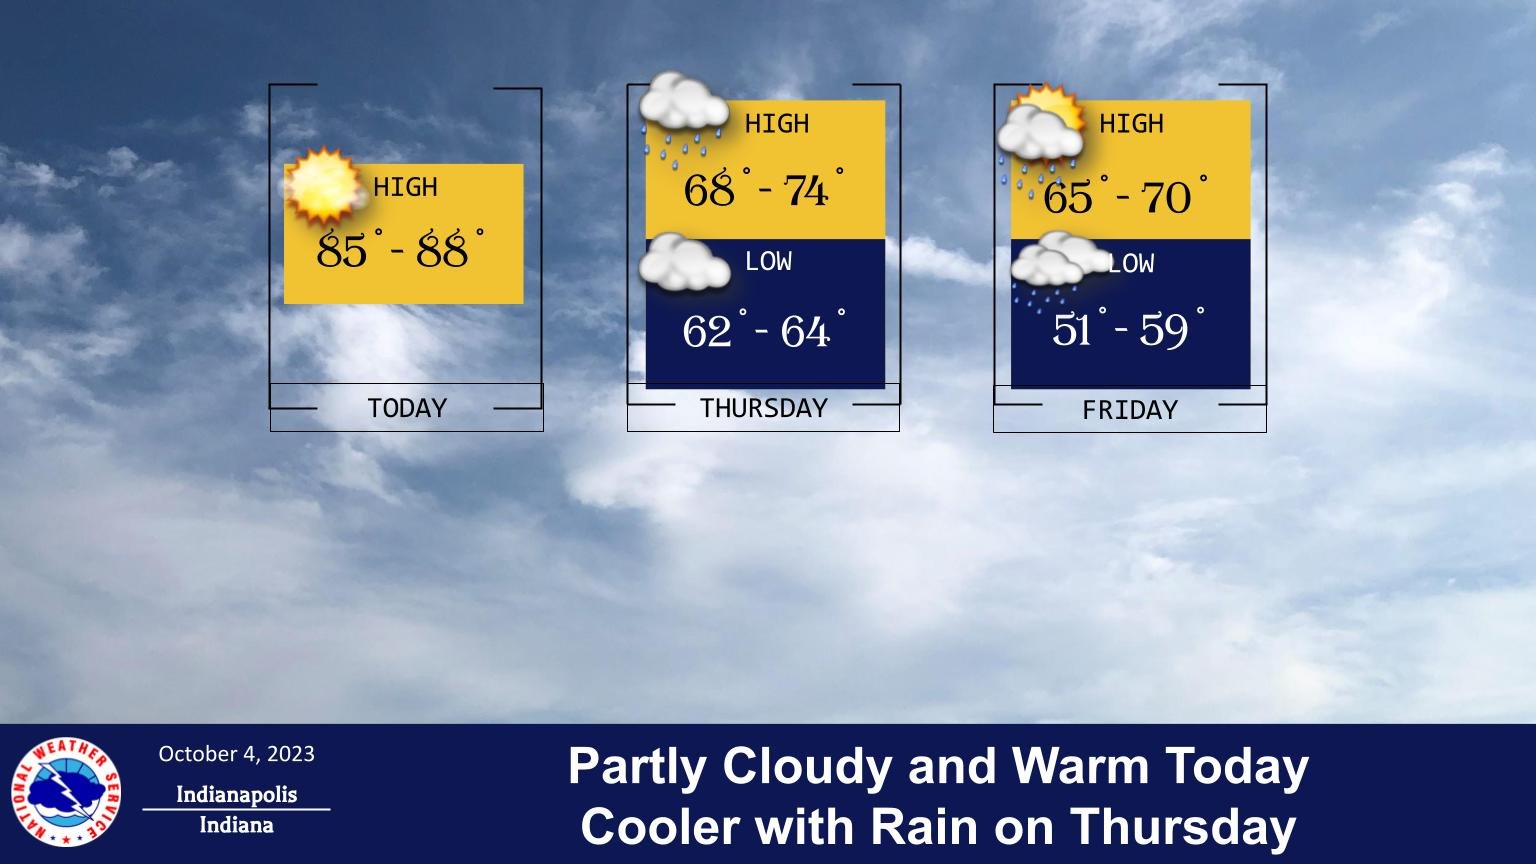 Temperature Plunge: Cold Front Brings Chilly Weather to Indianapolis"